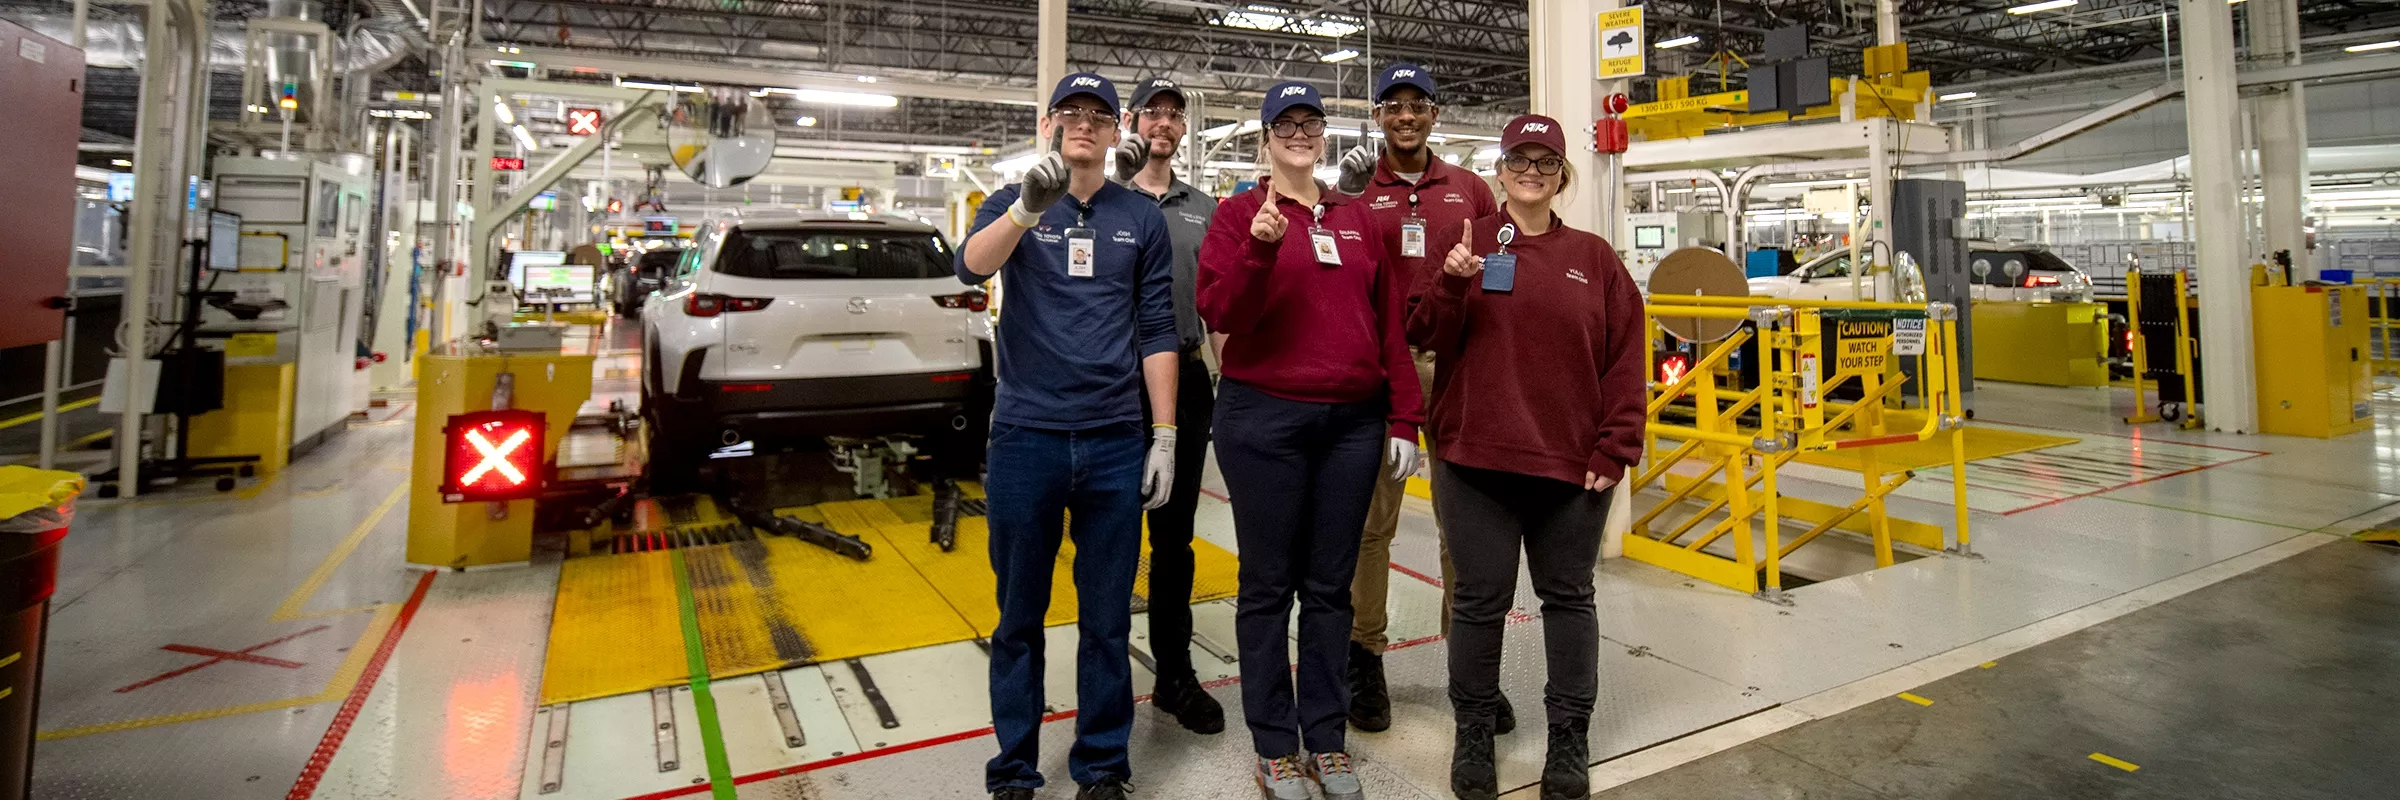 New Employees for Mazda Toyota's Automotive Manufacturing Jobs in North Alabama